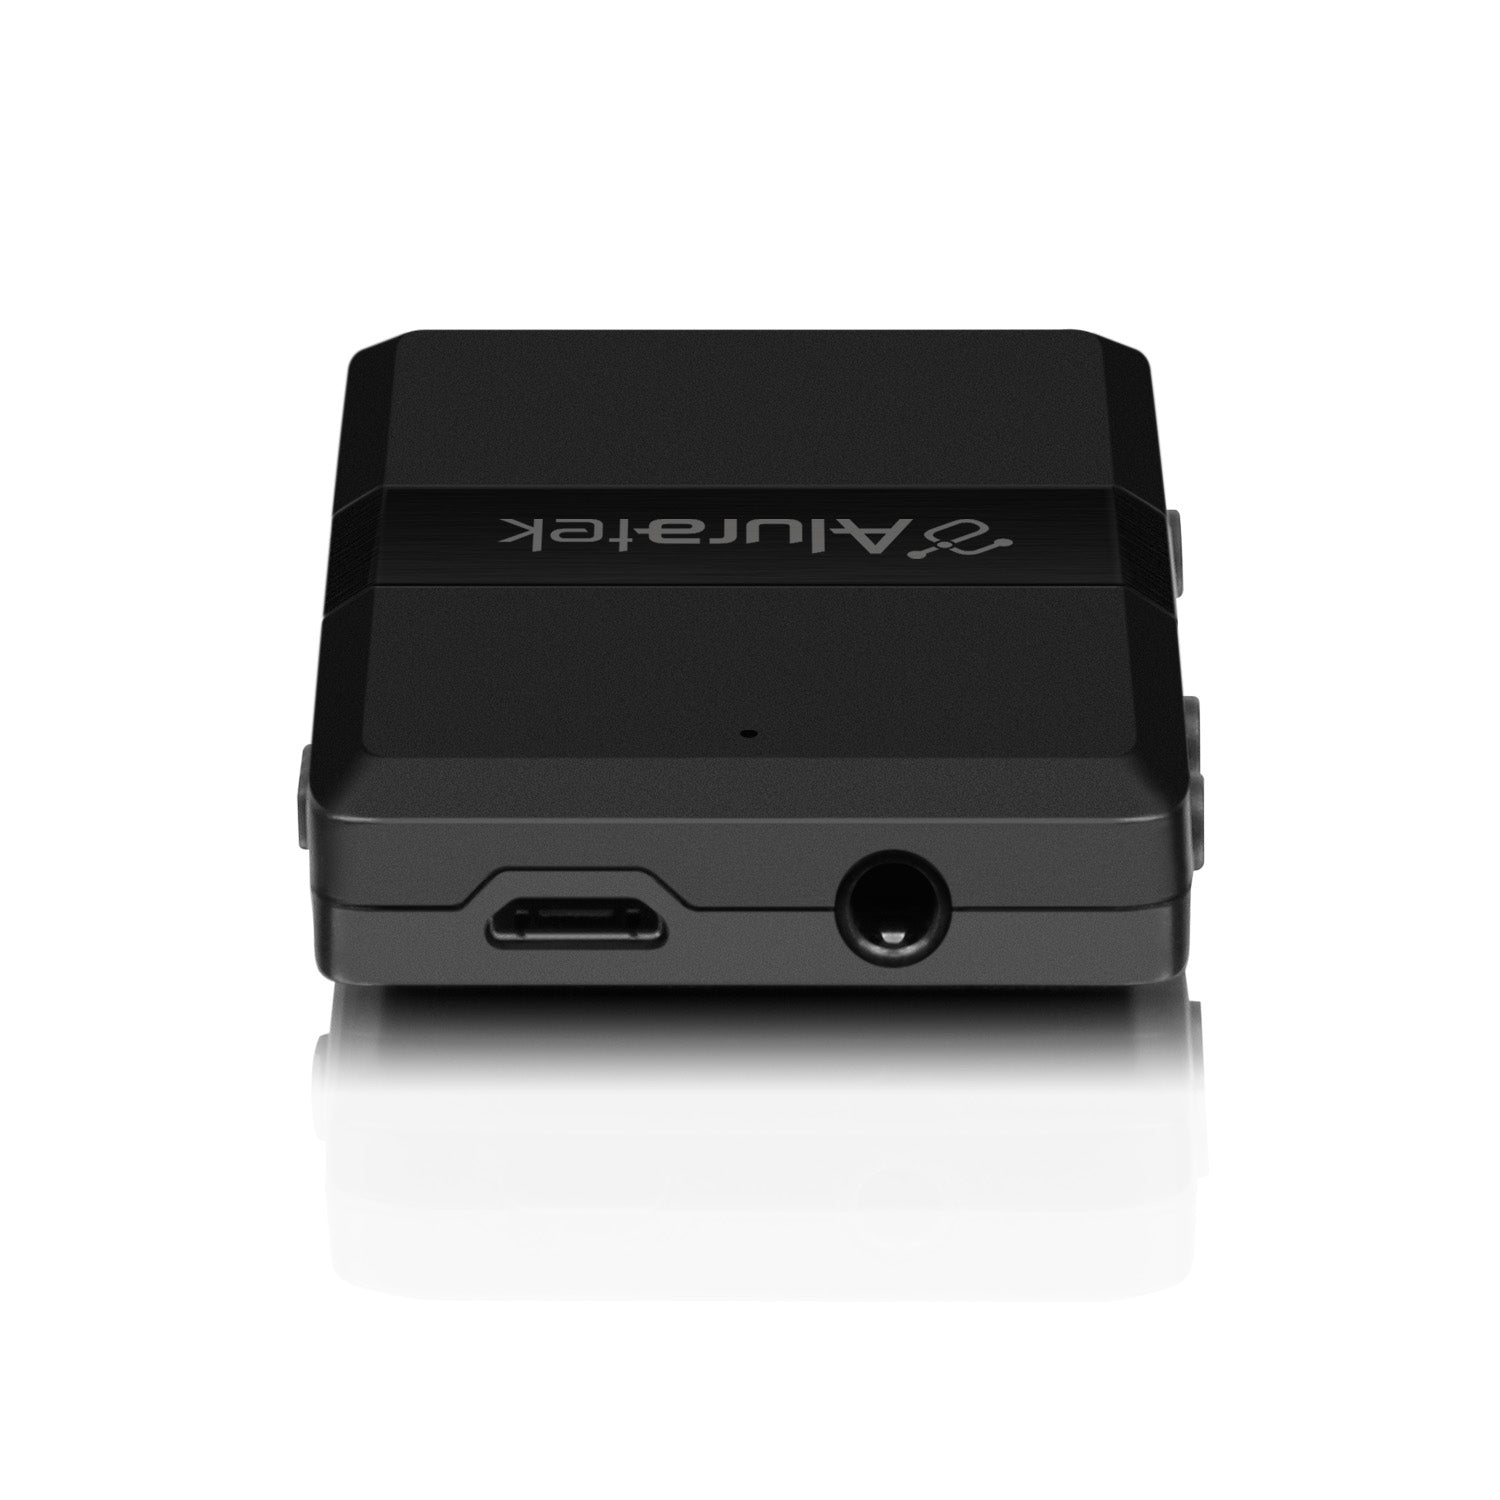 Bluetooth Receiver / Transmitter with Detached Cable | Bluetooth